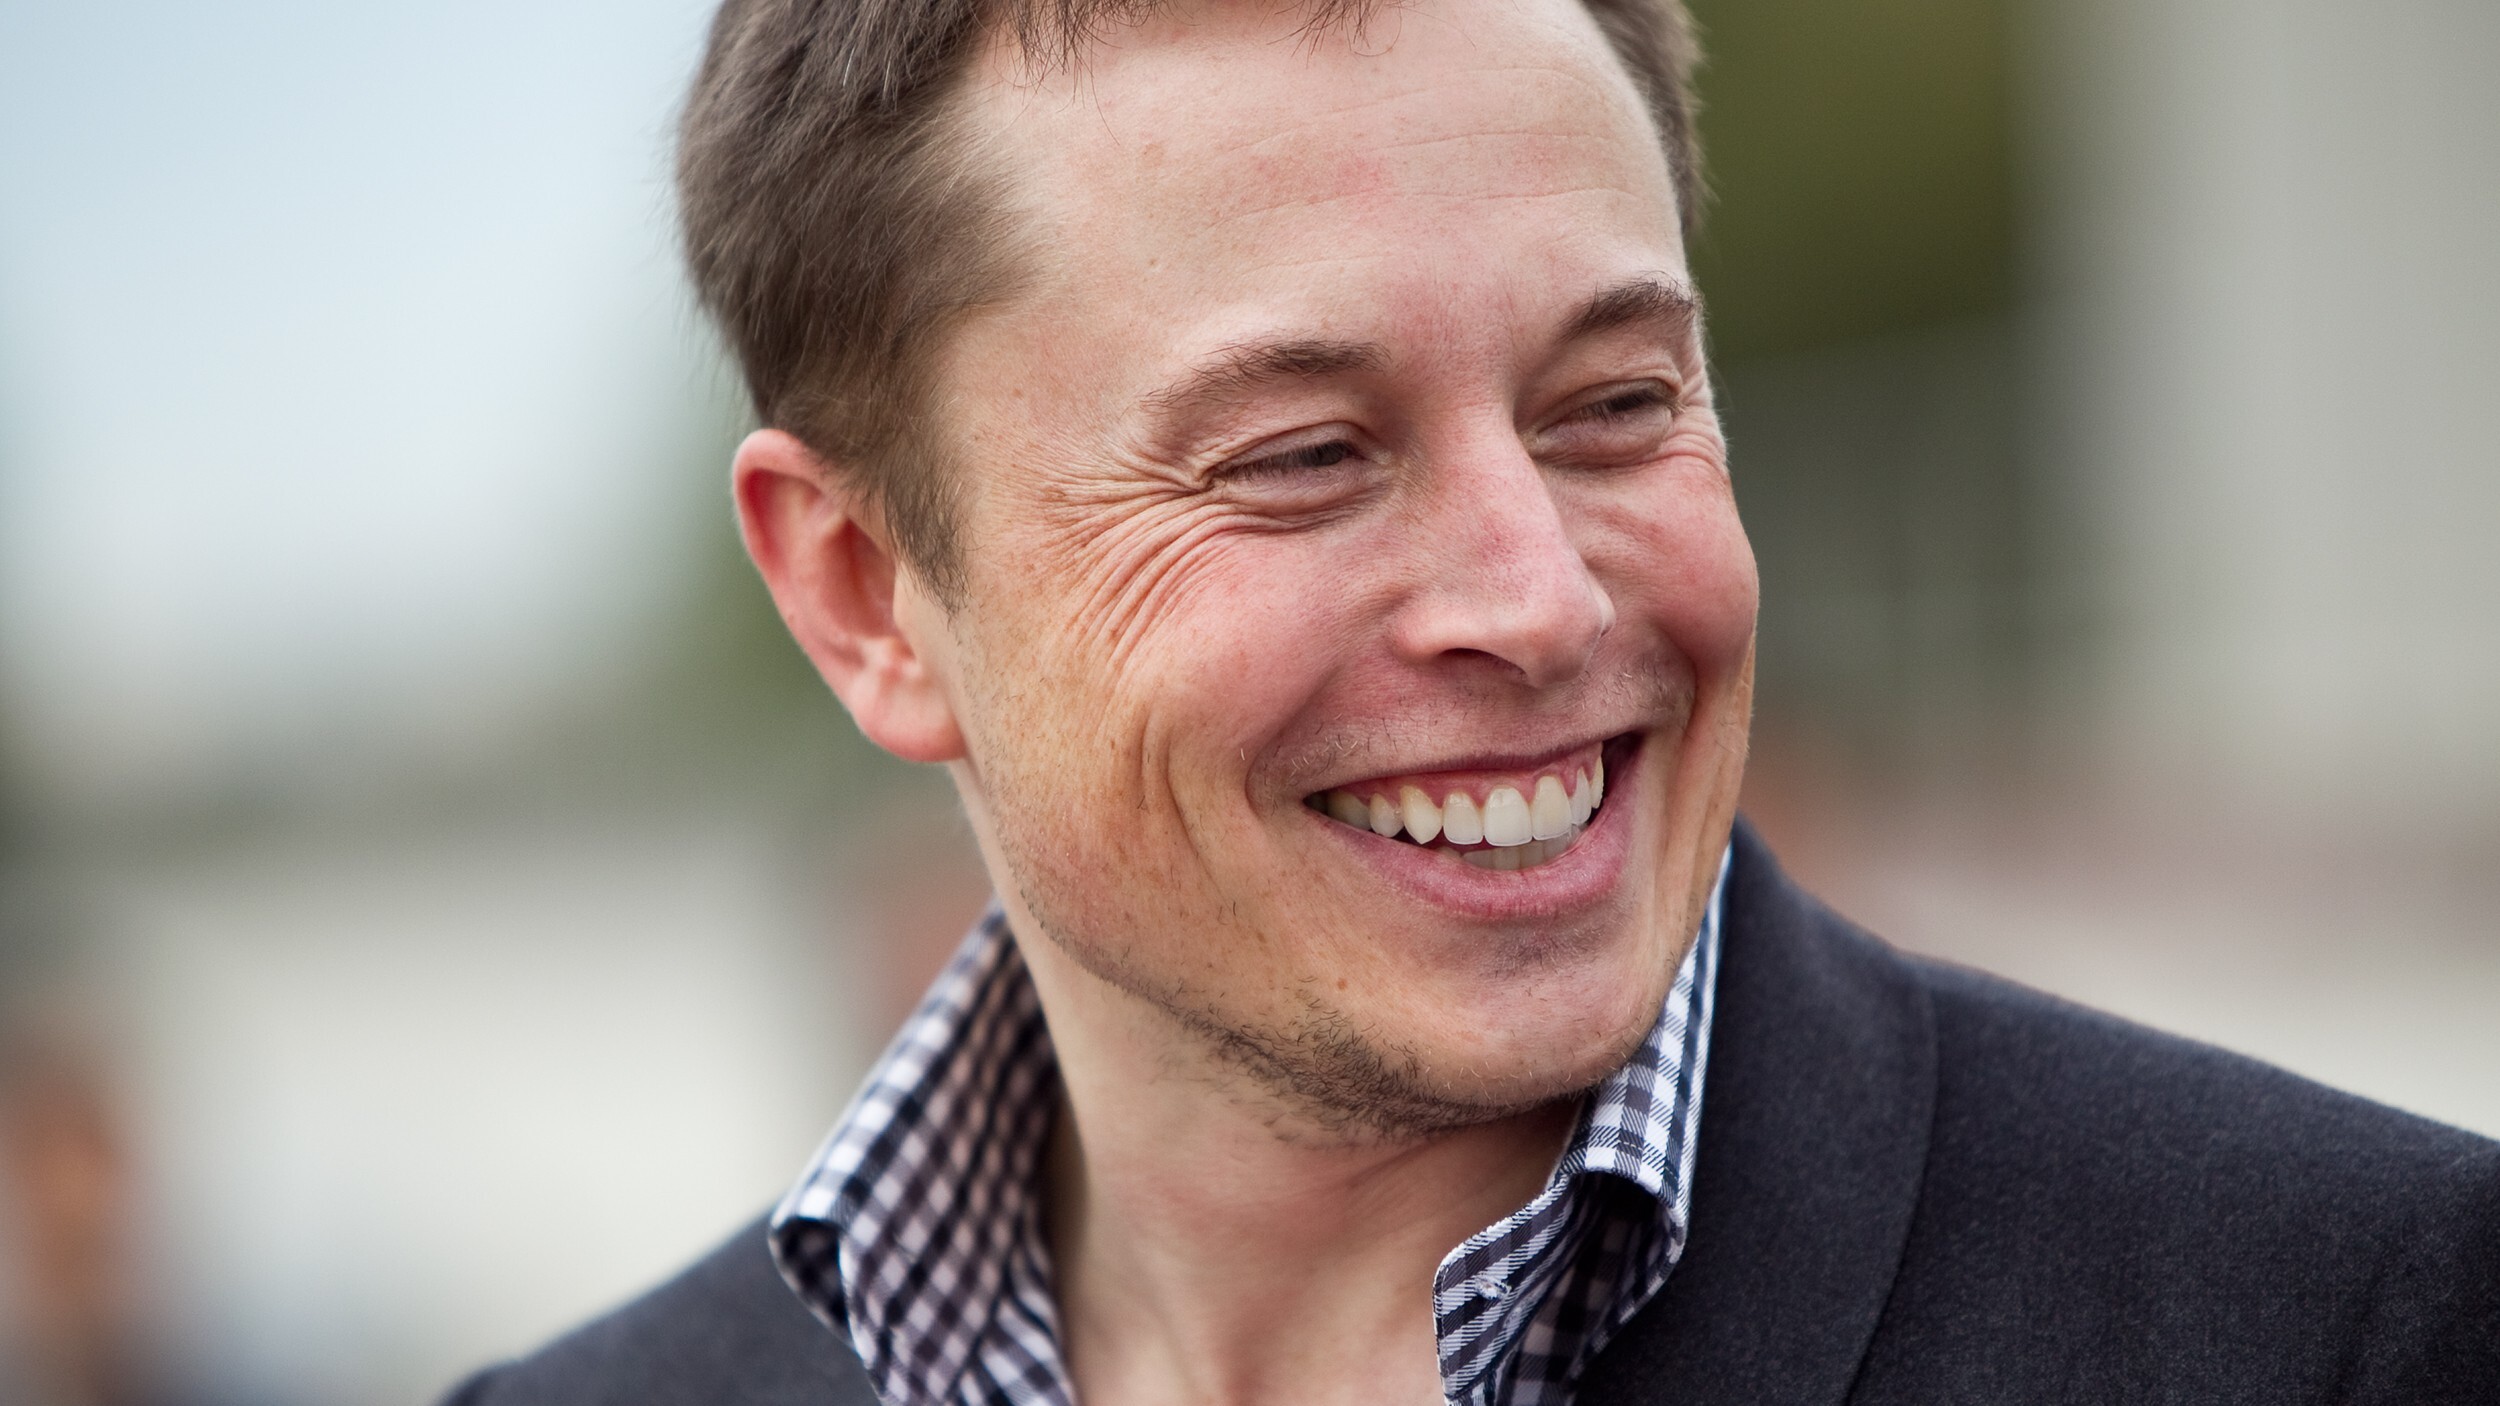 Elon Musk: Cofounded six companies including electric car maker Tesla, rocket producer SpaceX and tunneling startup Boring Company. 2500x1410 HD Wallpaper.